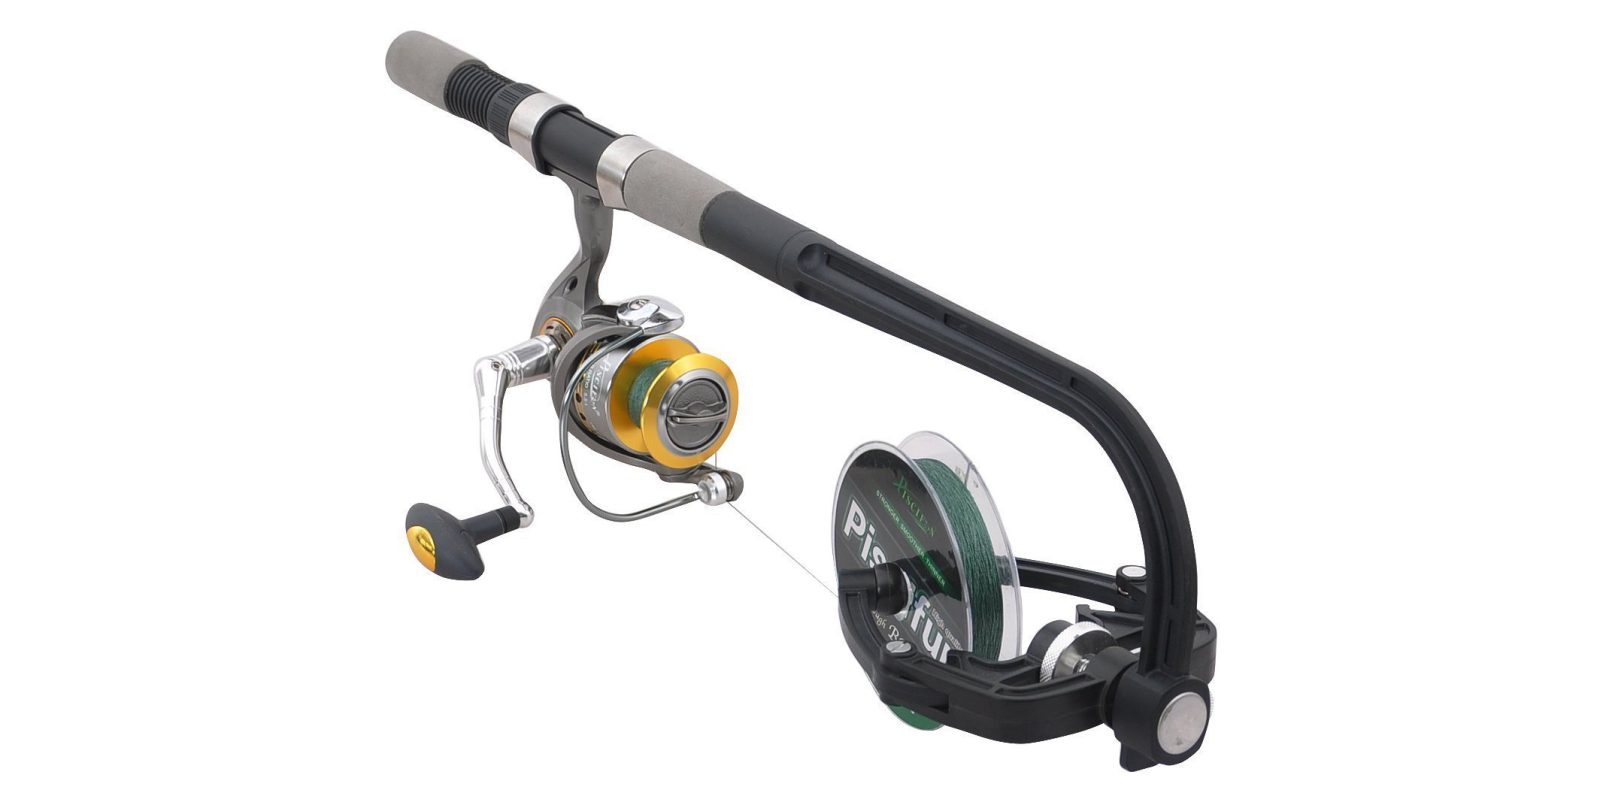 Load up on new fishing gear from 6.50 in today's Amazon Gold Box